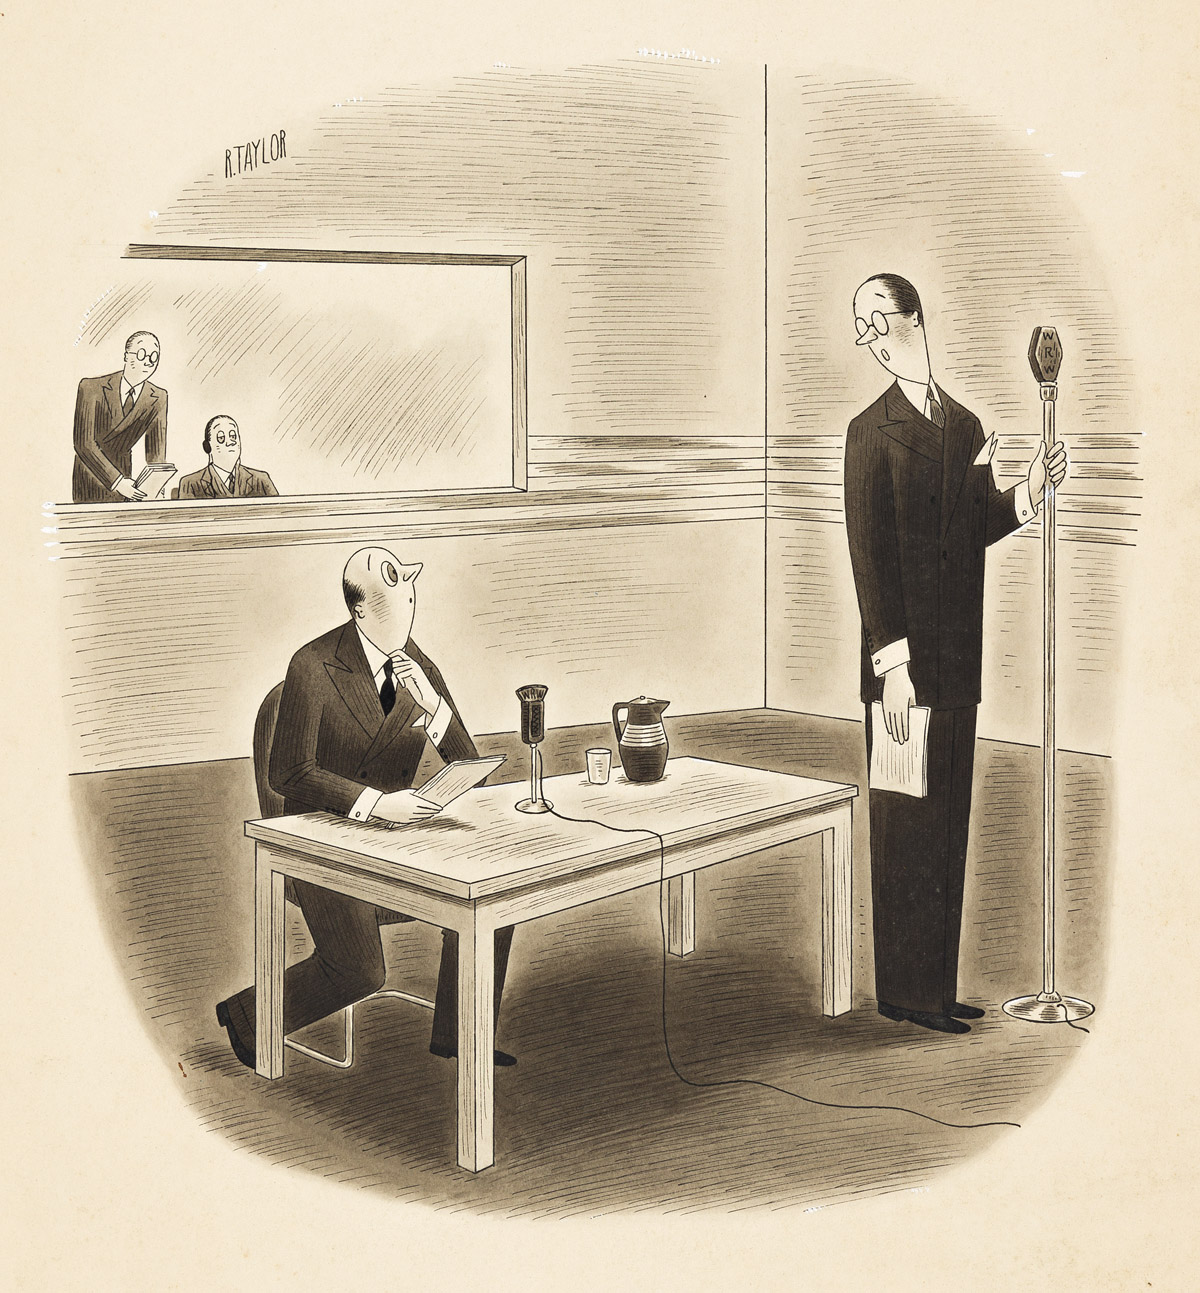 RICHARD TAYLOR (1902-1970) [NEW YORKER / CARTOONS] You neednt be frightened, Mr. Jones. Our polls show that practically nobody listen